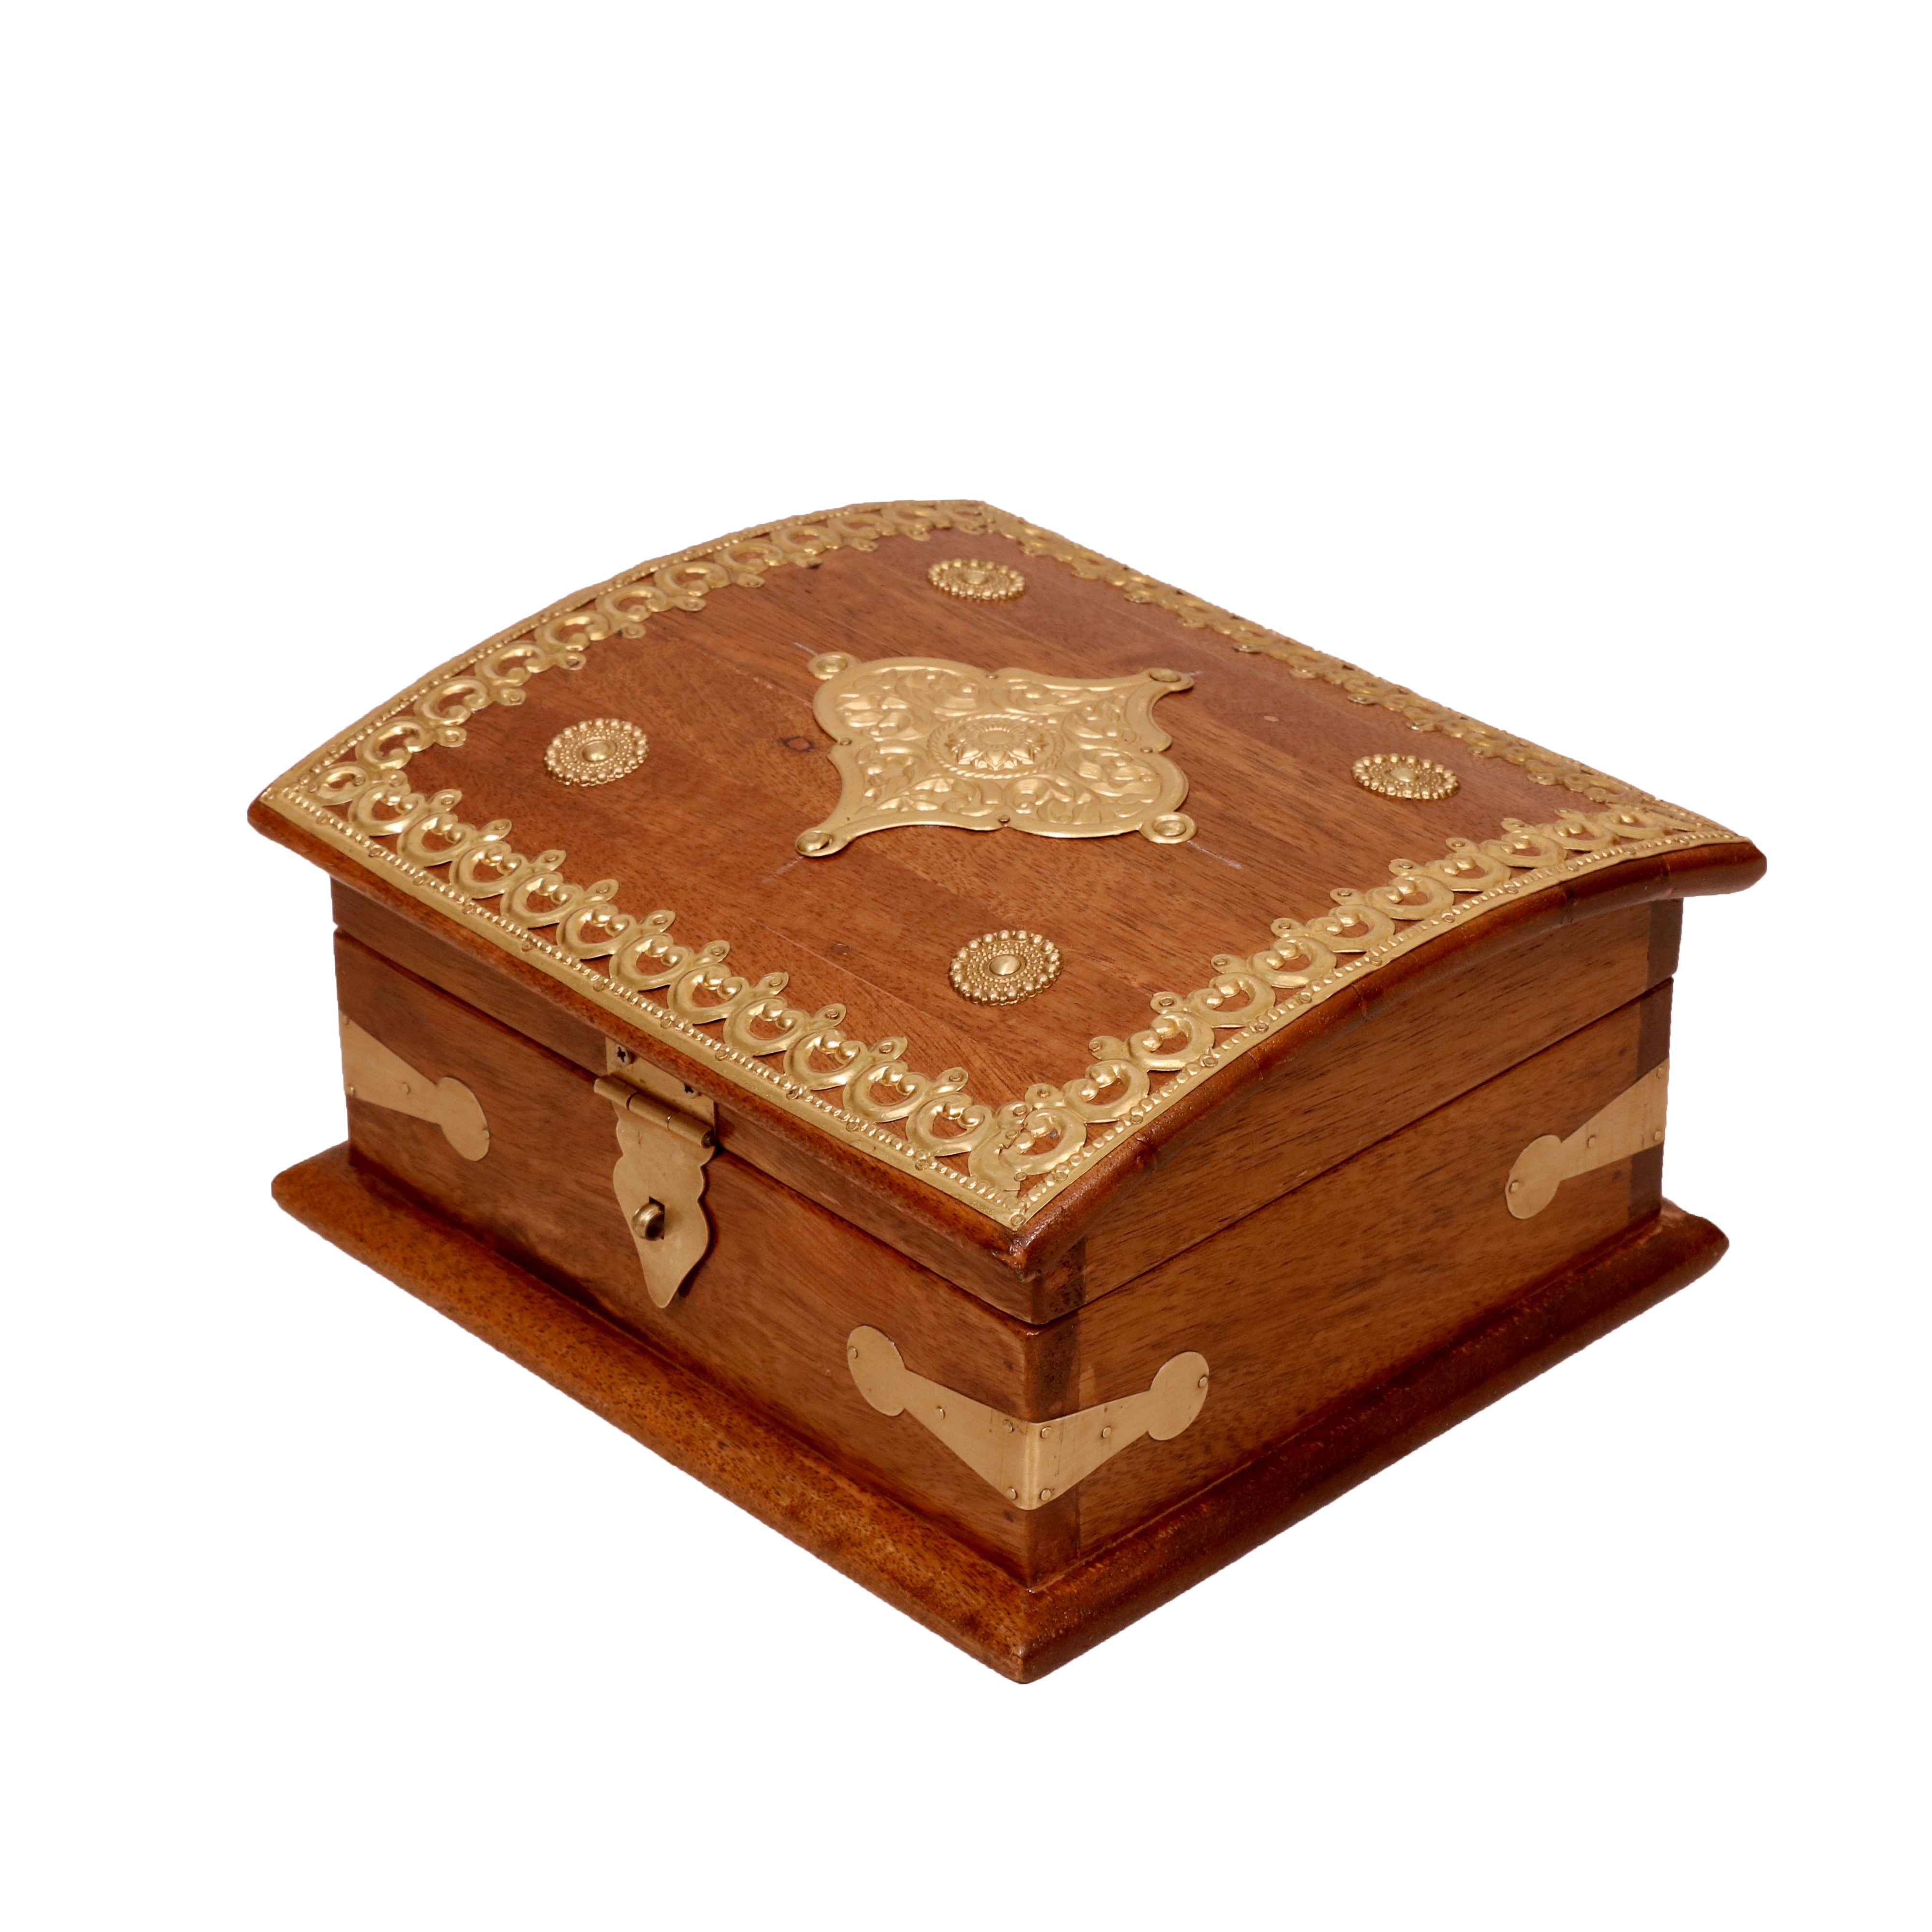 Wooden Curved Boxes Medium (9.5 x 8.5 x 5 Inch) Wooden Box